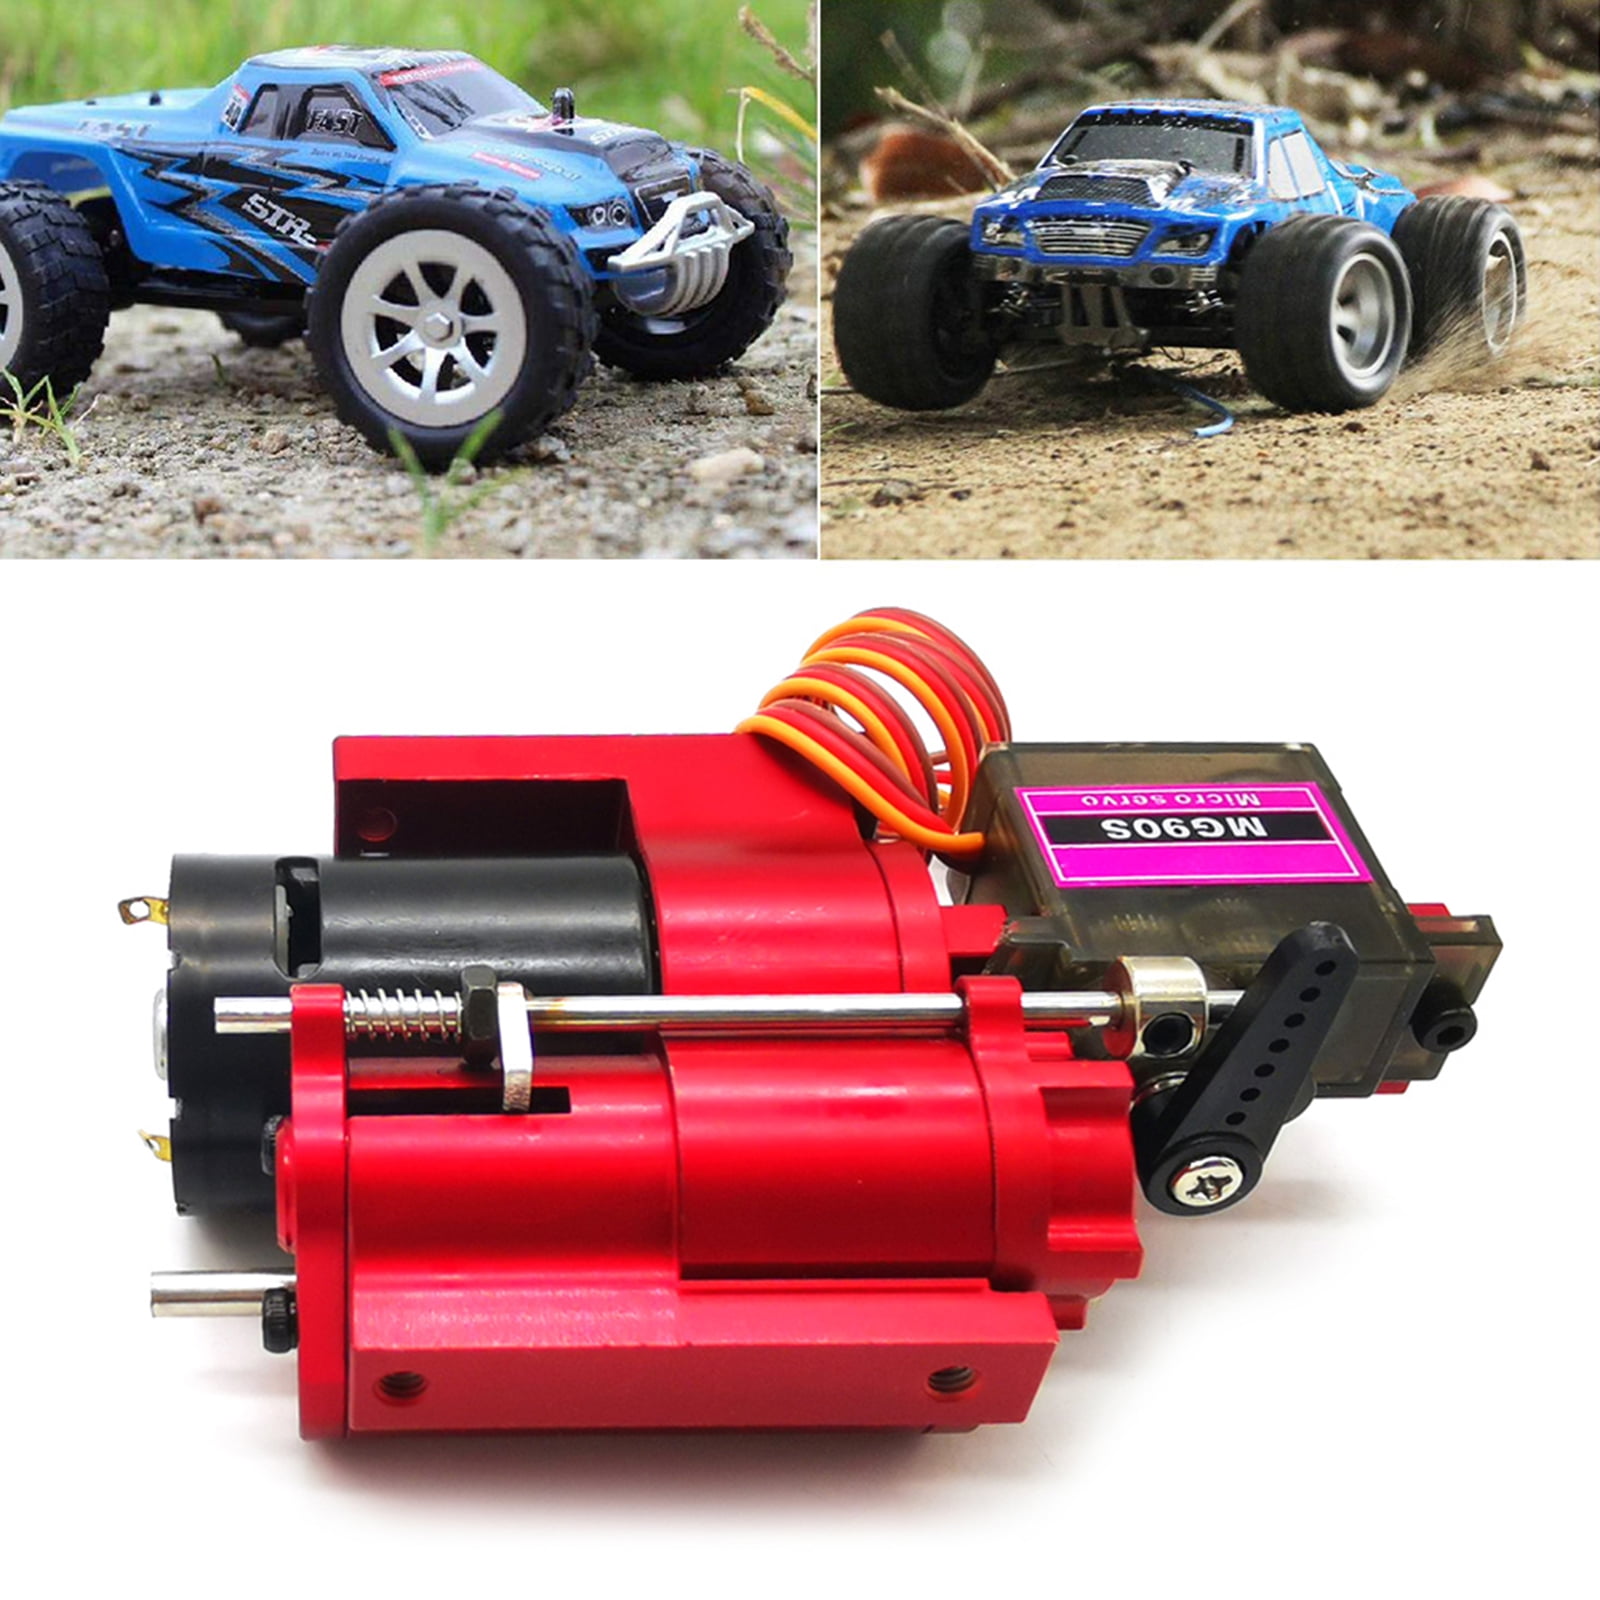 YU-NIYUT Metal Gearbox Transmission Box Gear Box for Remote Control Car RC Rock Crawler DIY RC Vehicle Modification Fun for Adults and Kids 